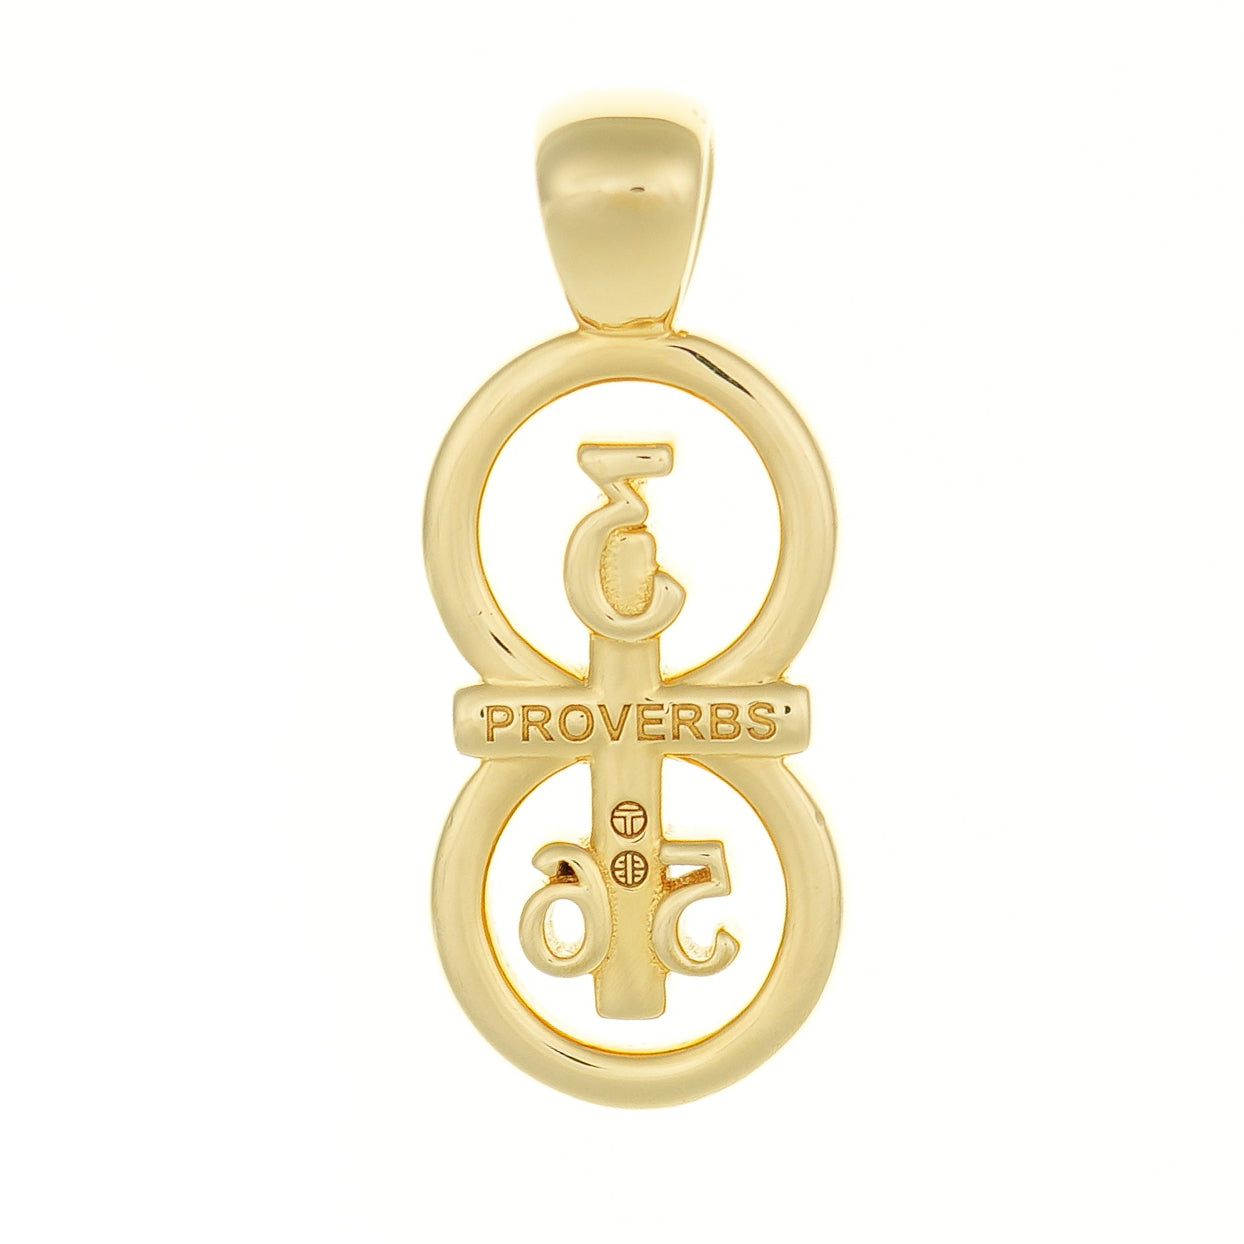 Back of the pendant shows the detail of the chapter name inscribed on the pendant and also the inscription of our logo tag so you know it is authentic. Our 29 and 11® pendant has the numbers 3, 5, and 6 intertwined with the cross to represent Proverbs 3:5-6 with the chapter word "Proverbs" inscribed on the back.